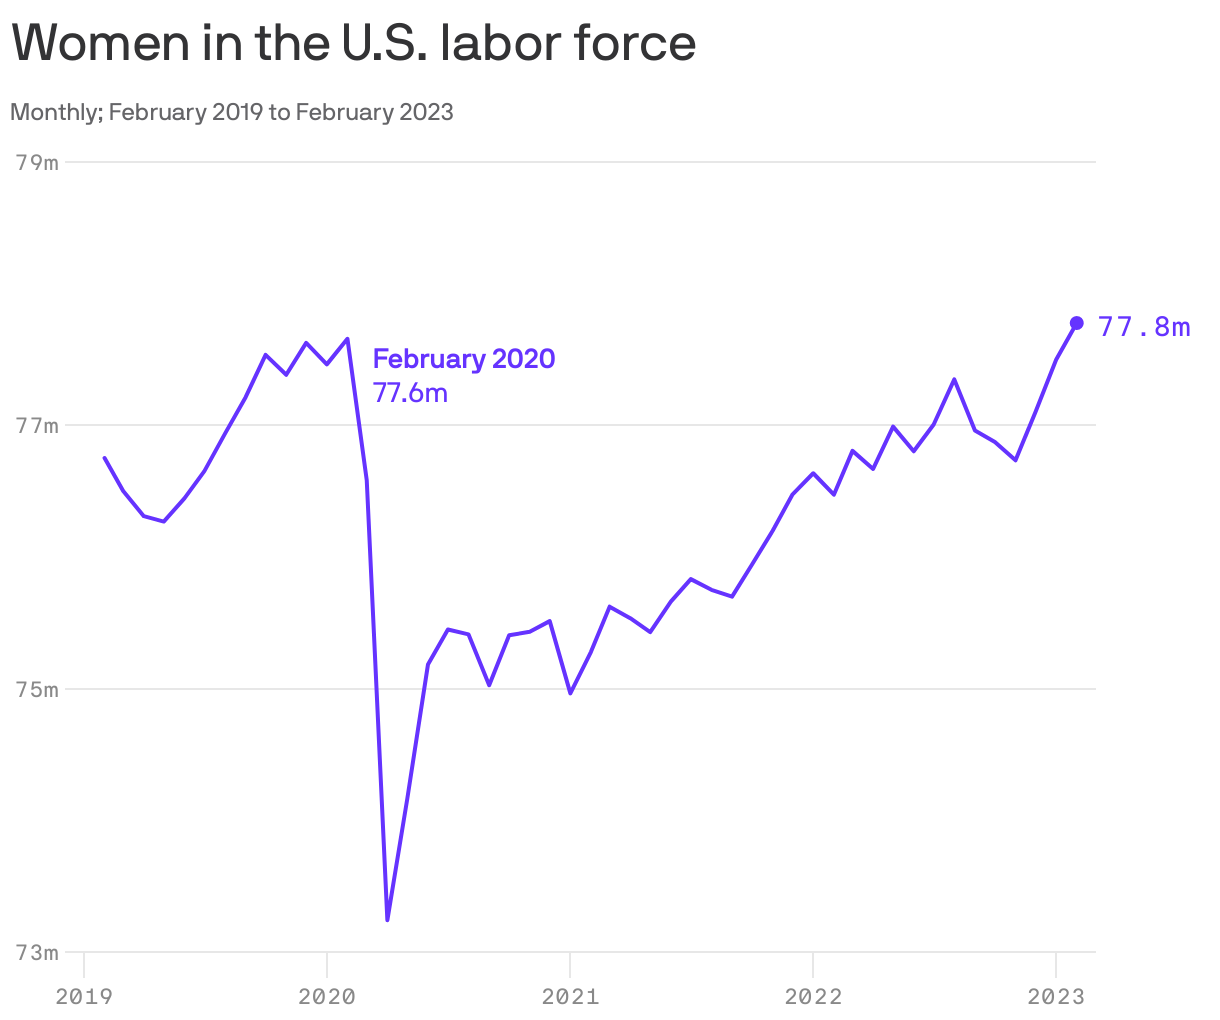 Women in the U.S. labor force